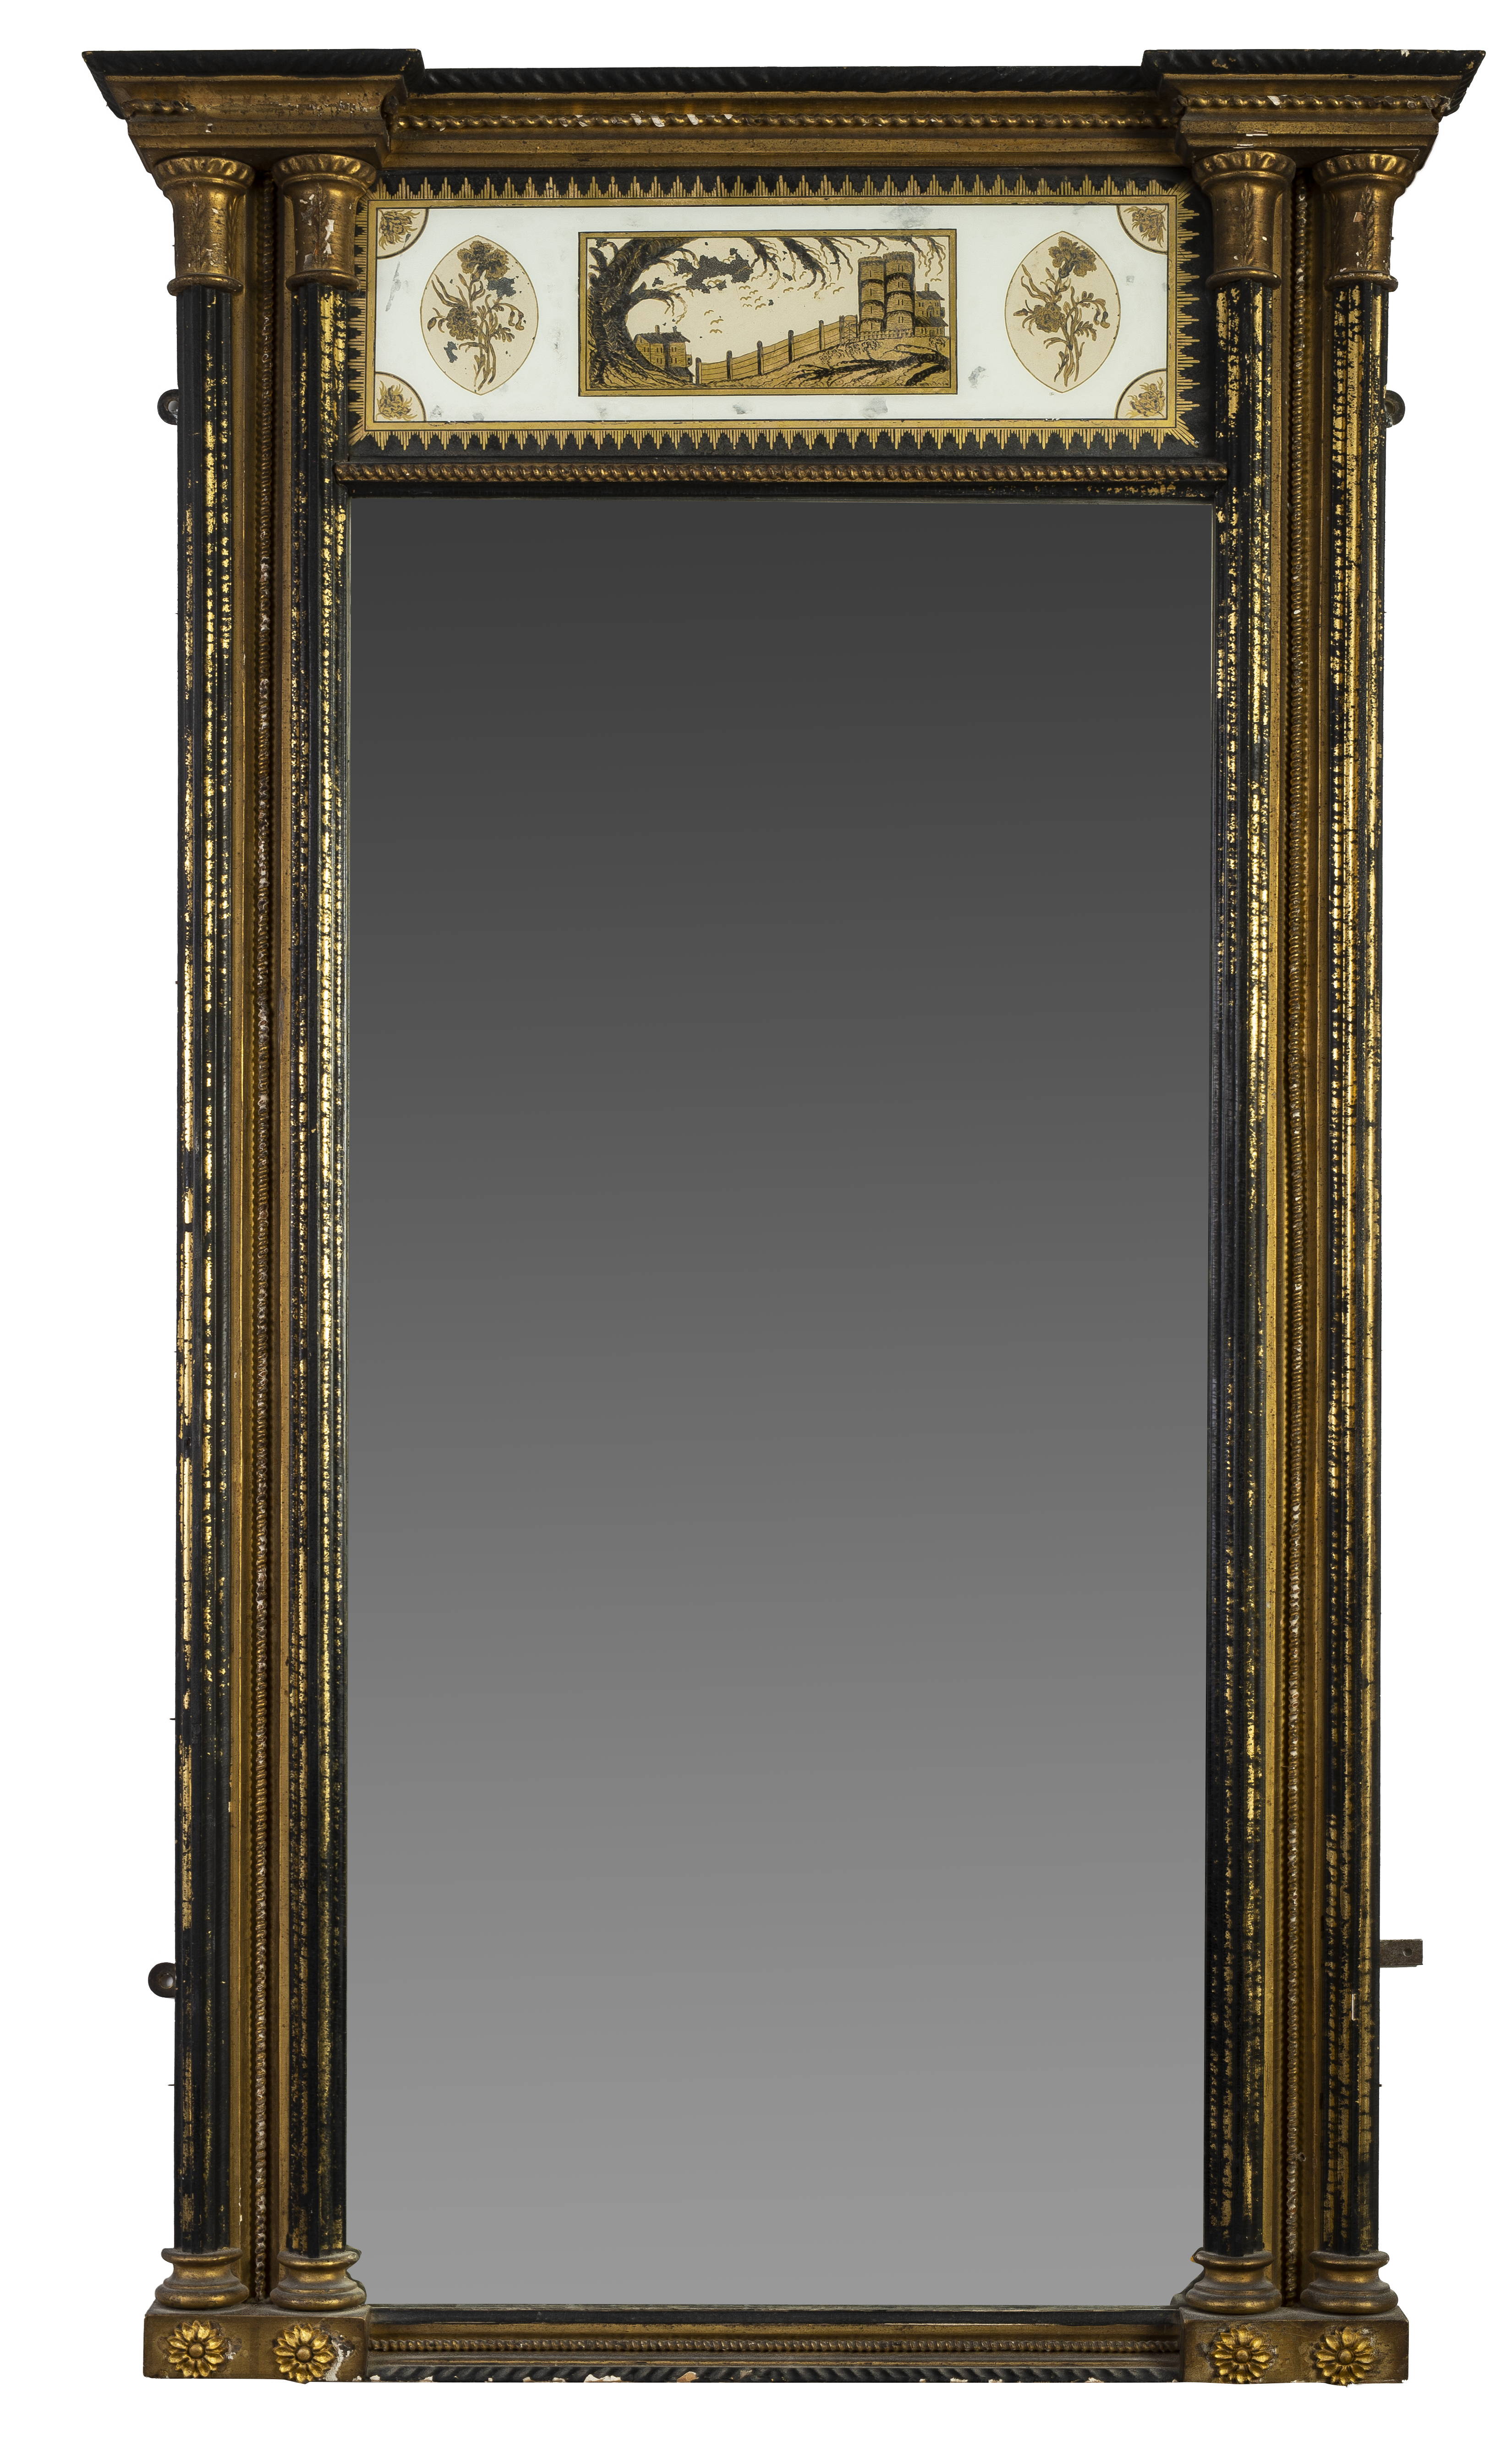 A very rare and fine Federal period gilded mirror